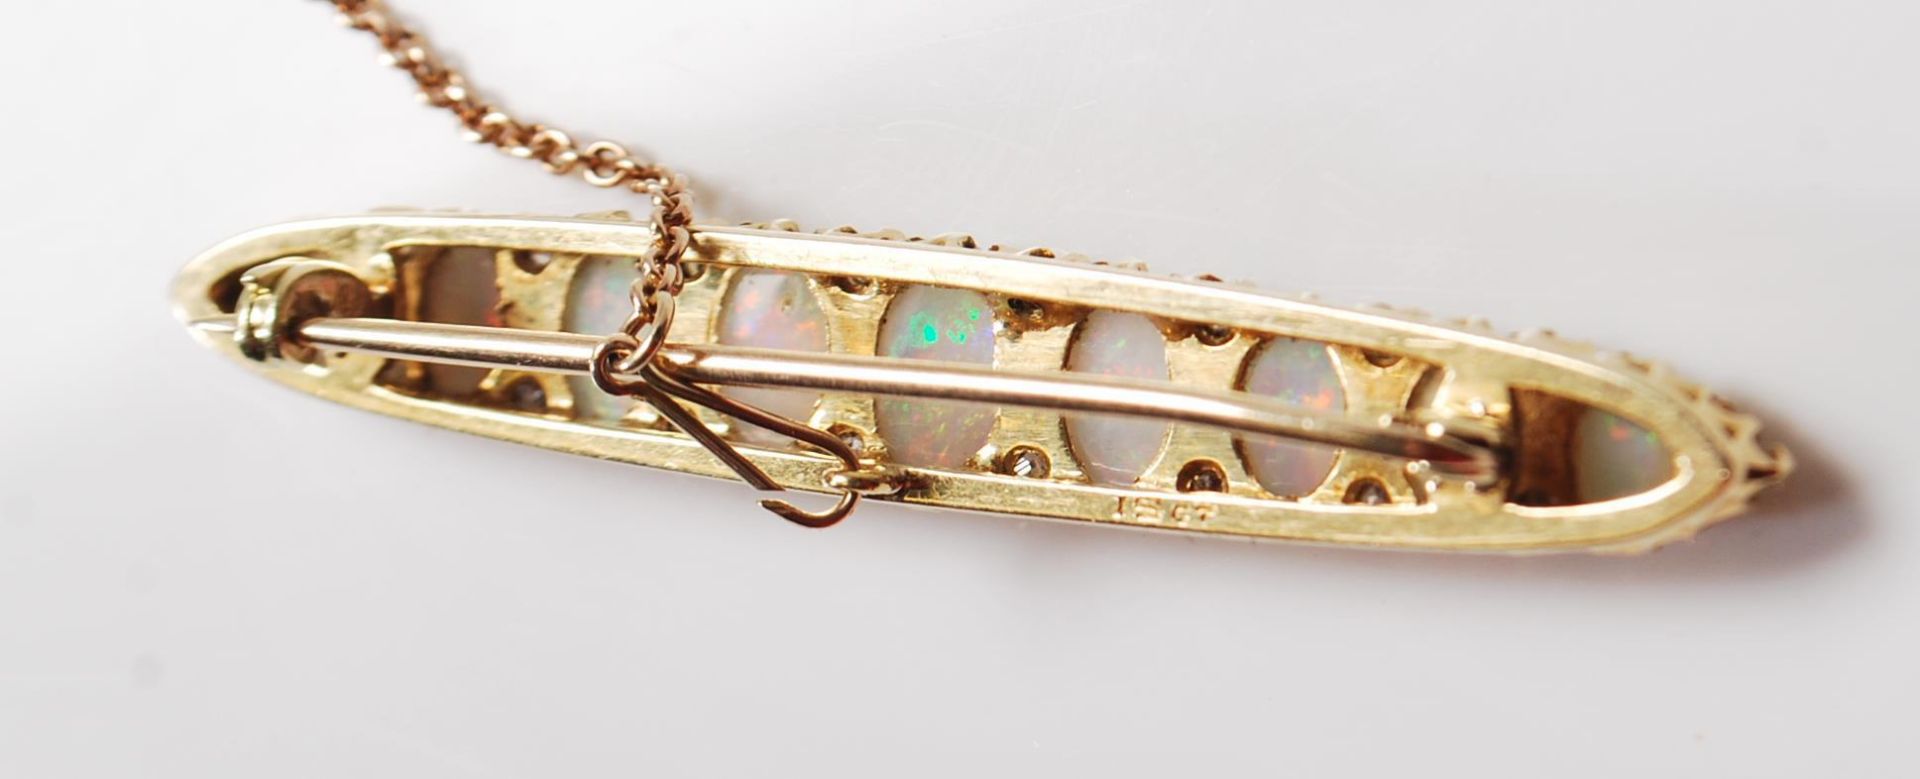 ANTIQUE 15CT GOLD OPAL AND DIAMOND BROOCH - Image 5 of 6